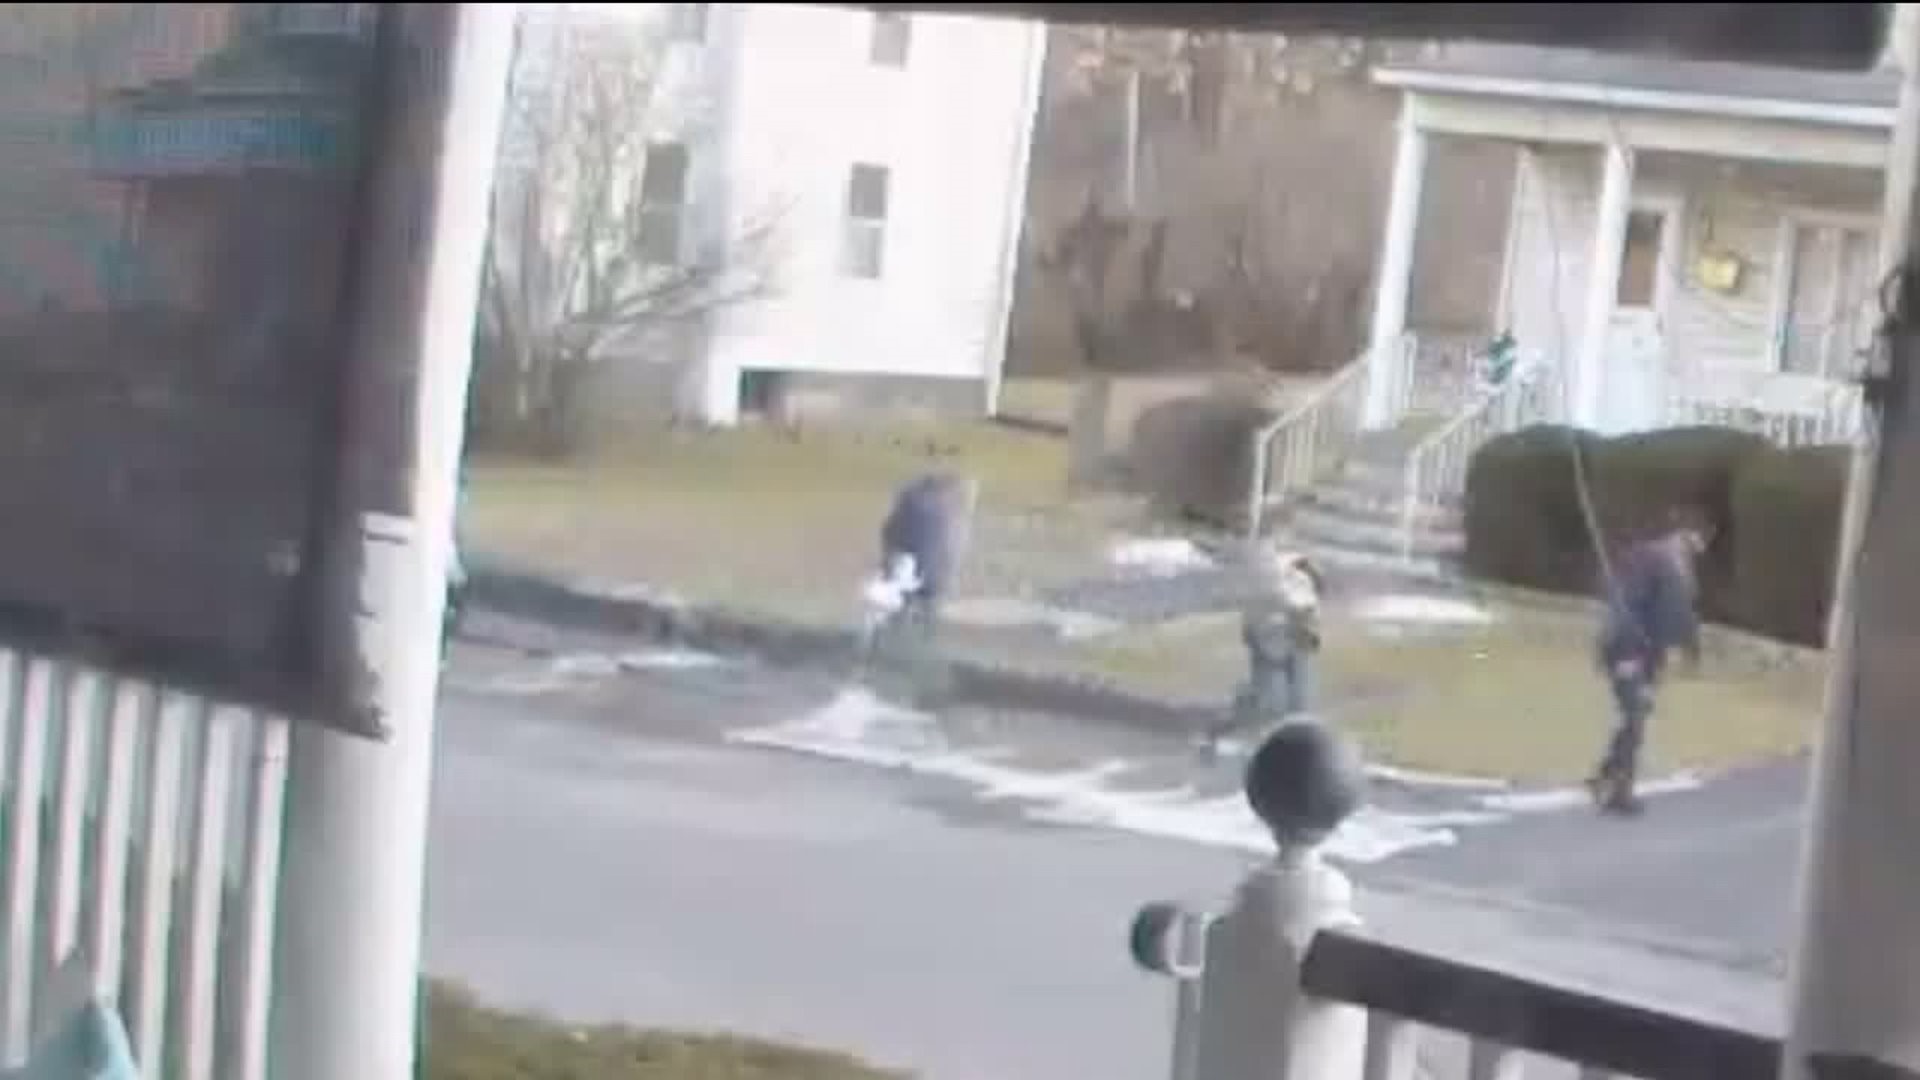 Robbers Posed as Utility Workers in Luzerne County